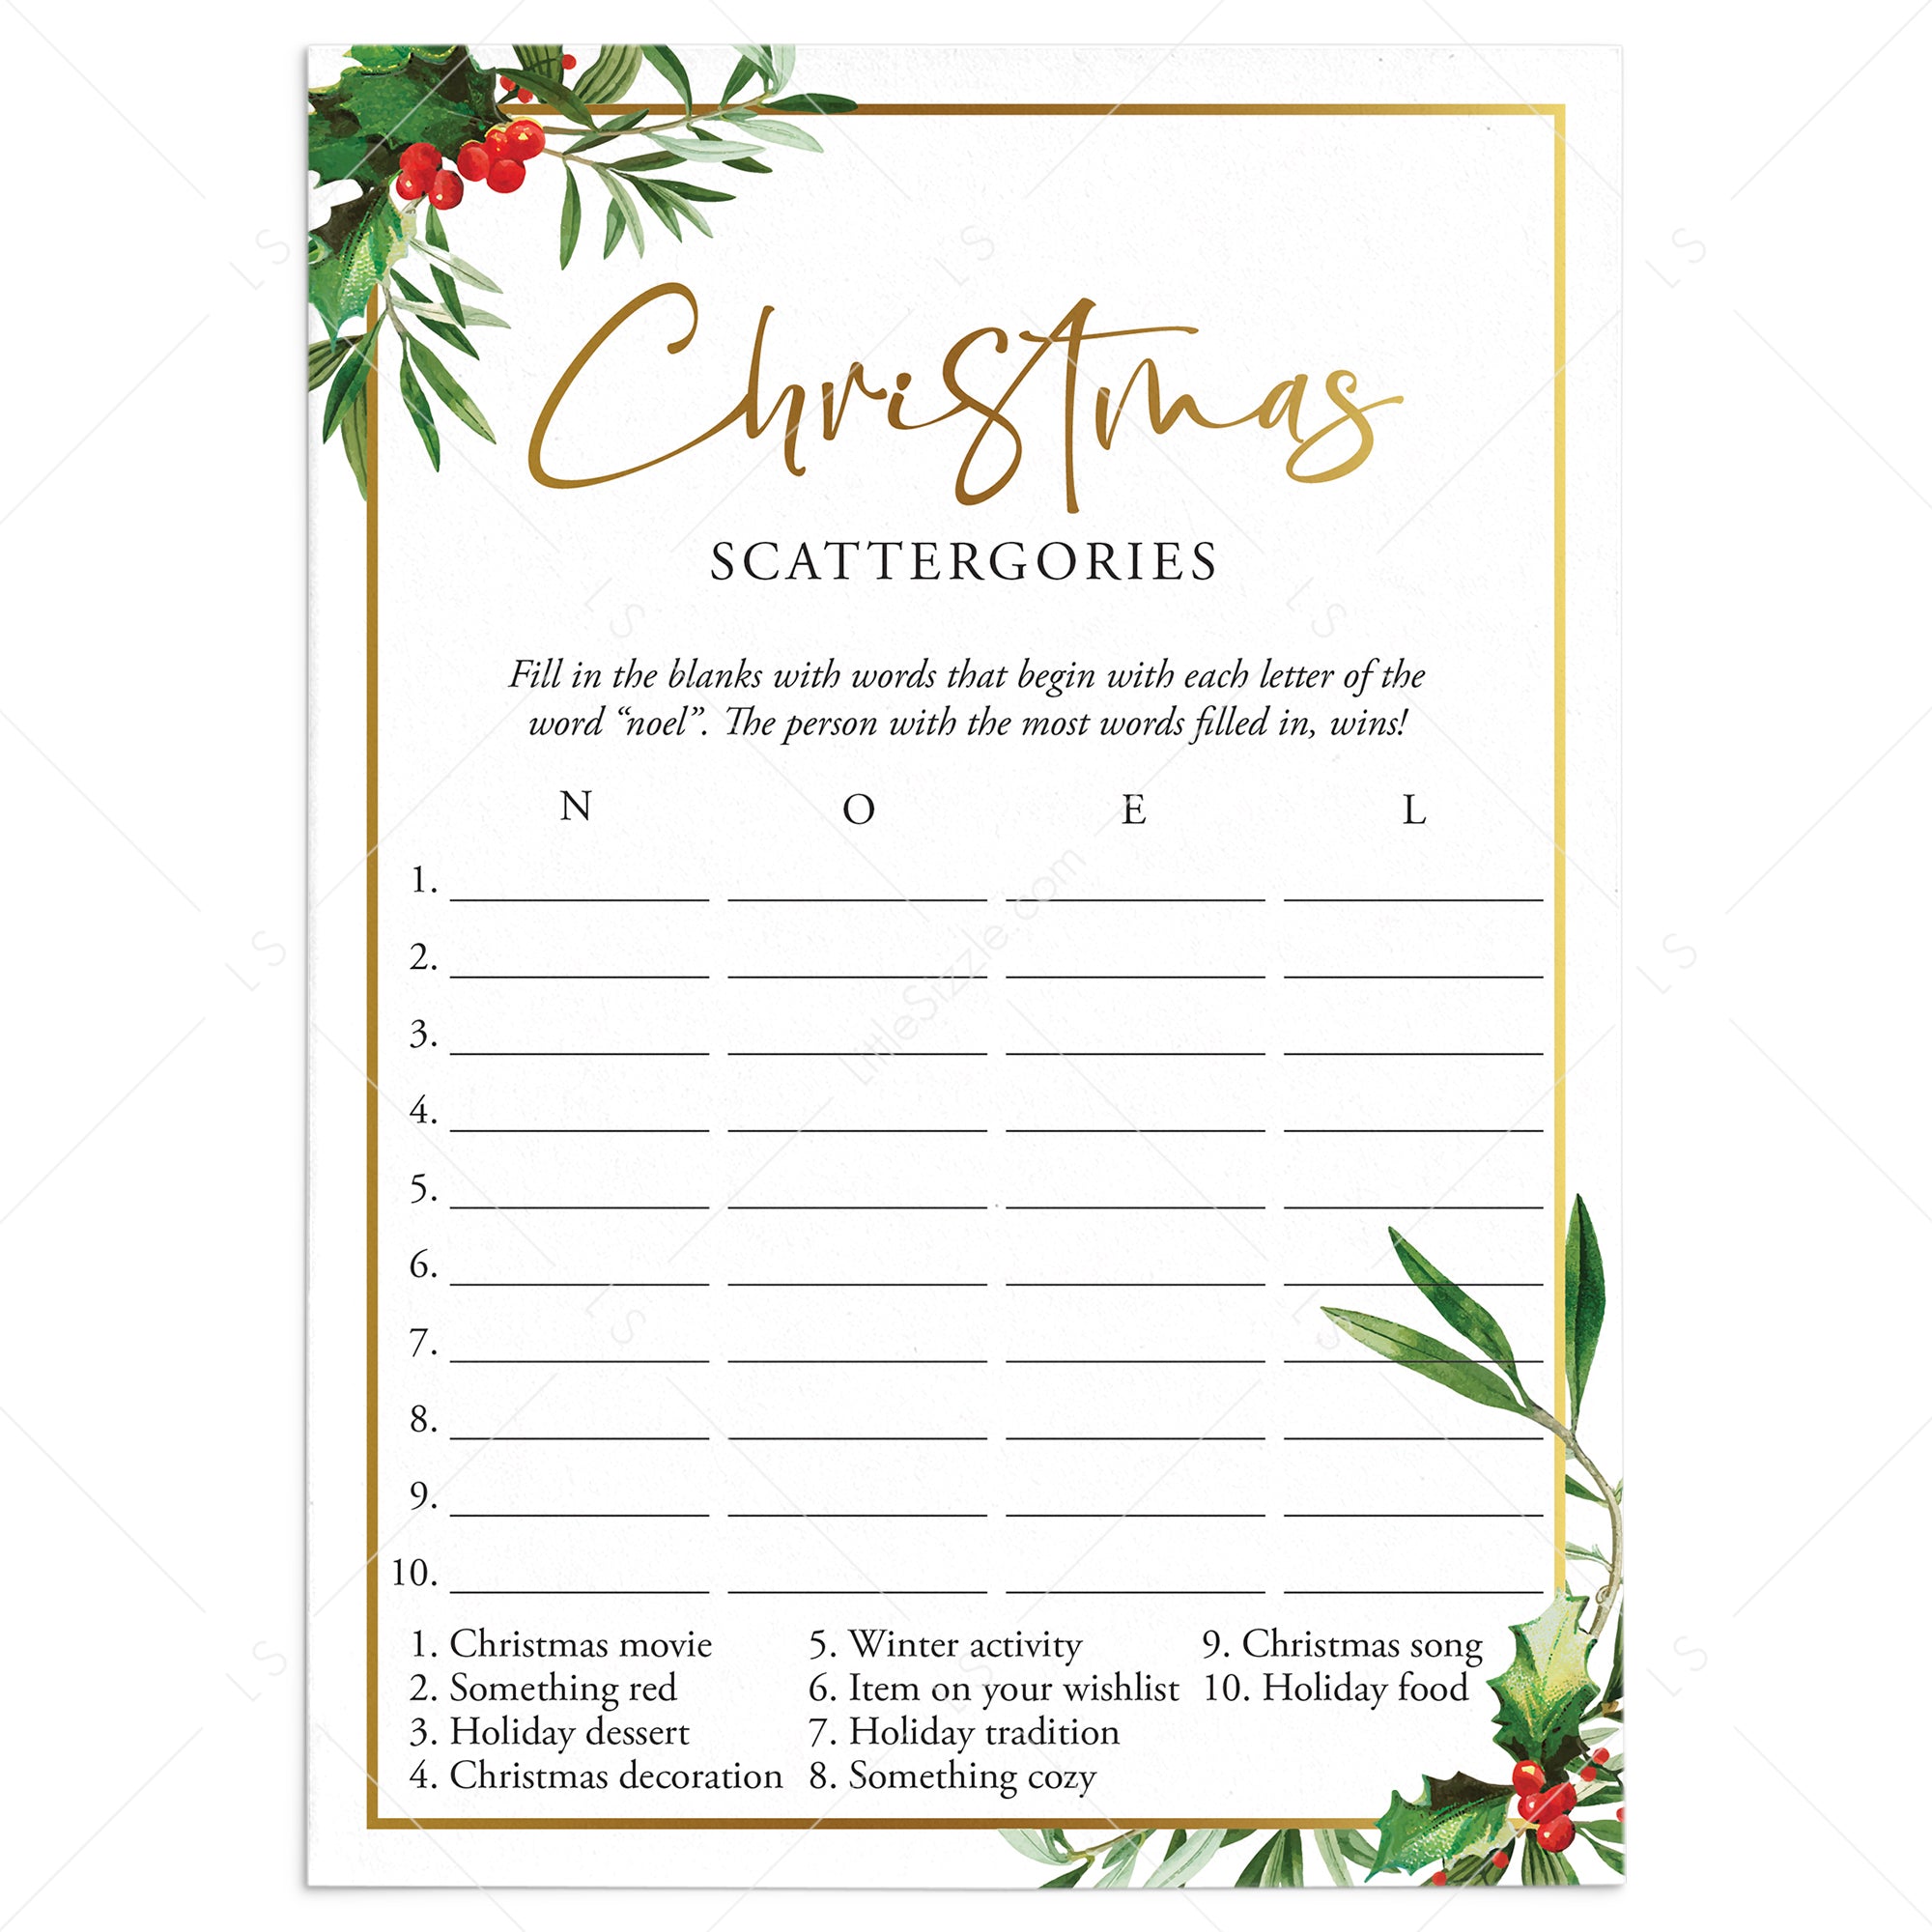 Christmas Scattergories Printable by LittleSizzle